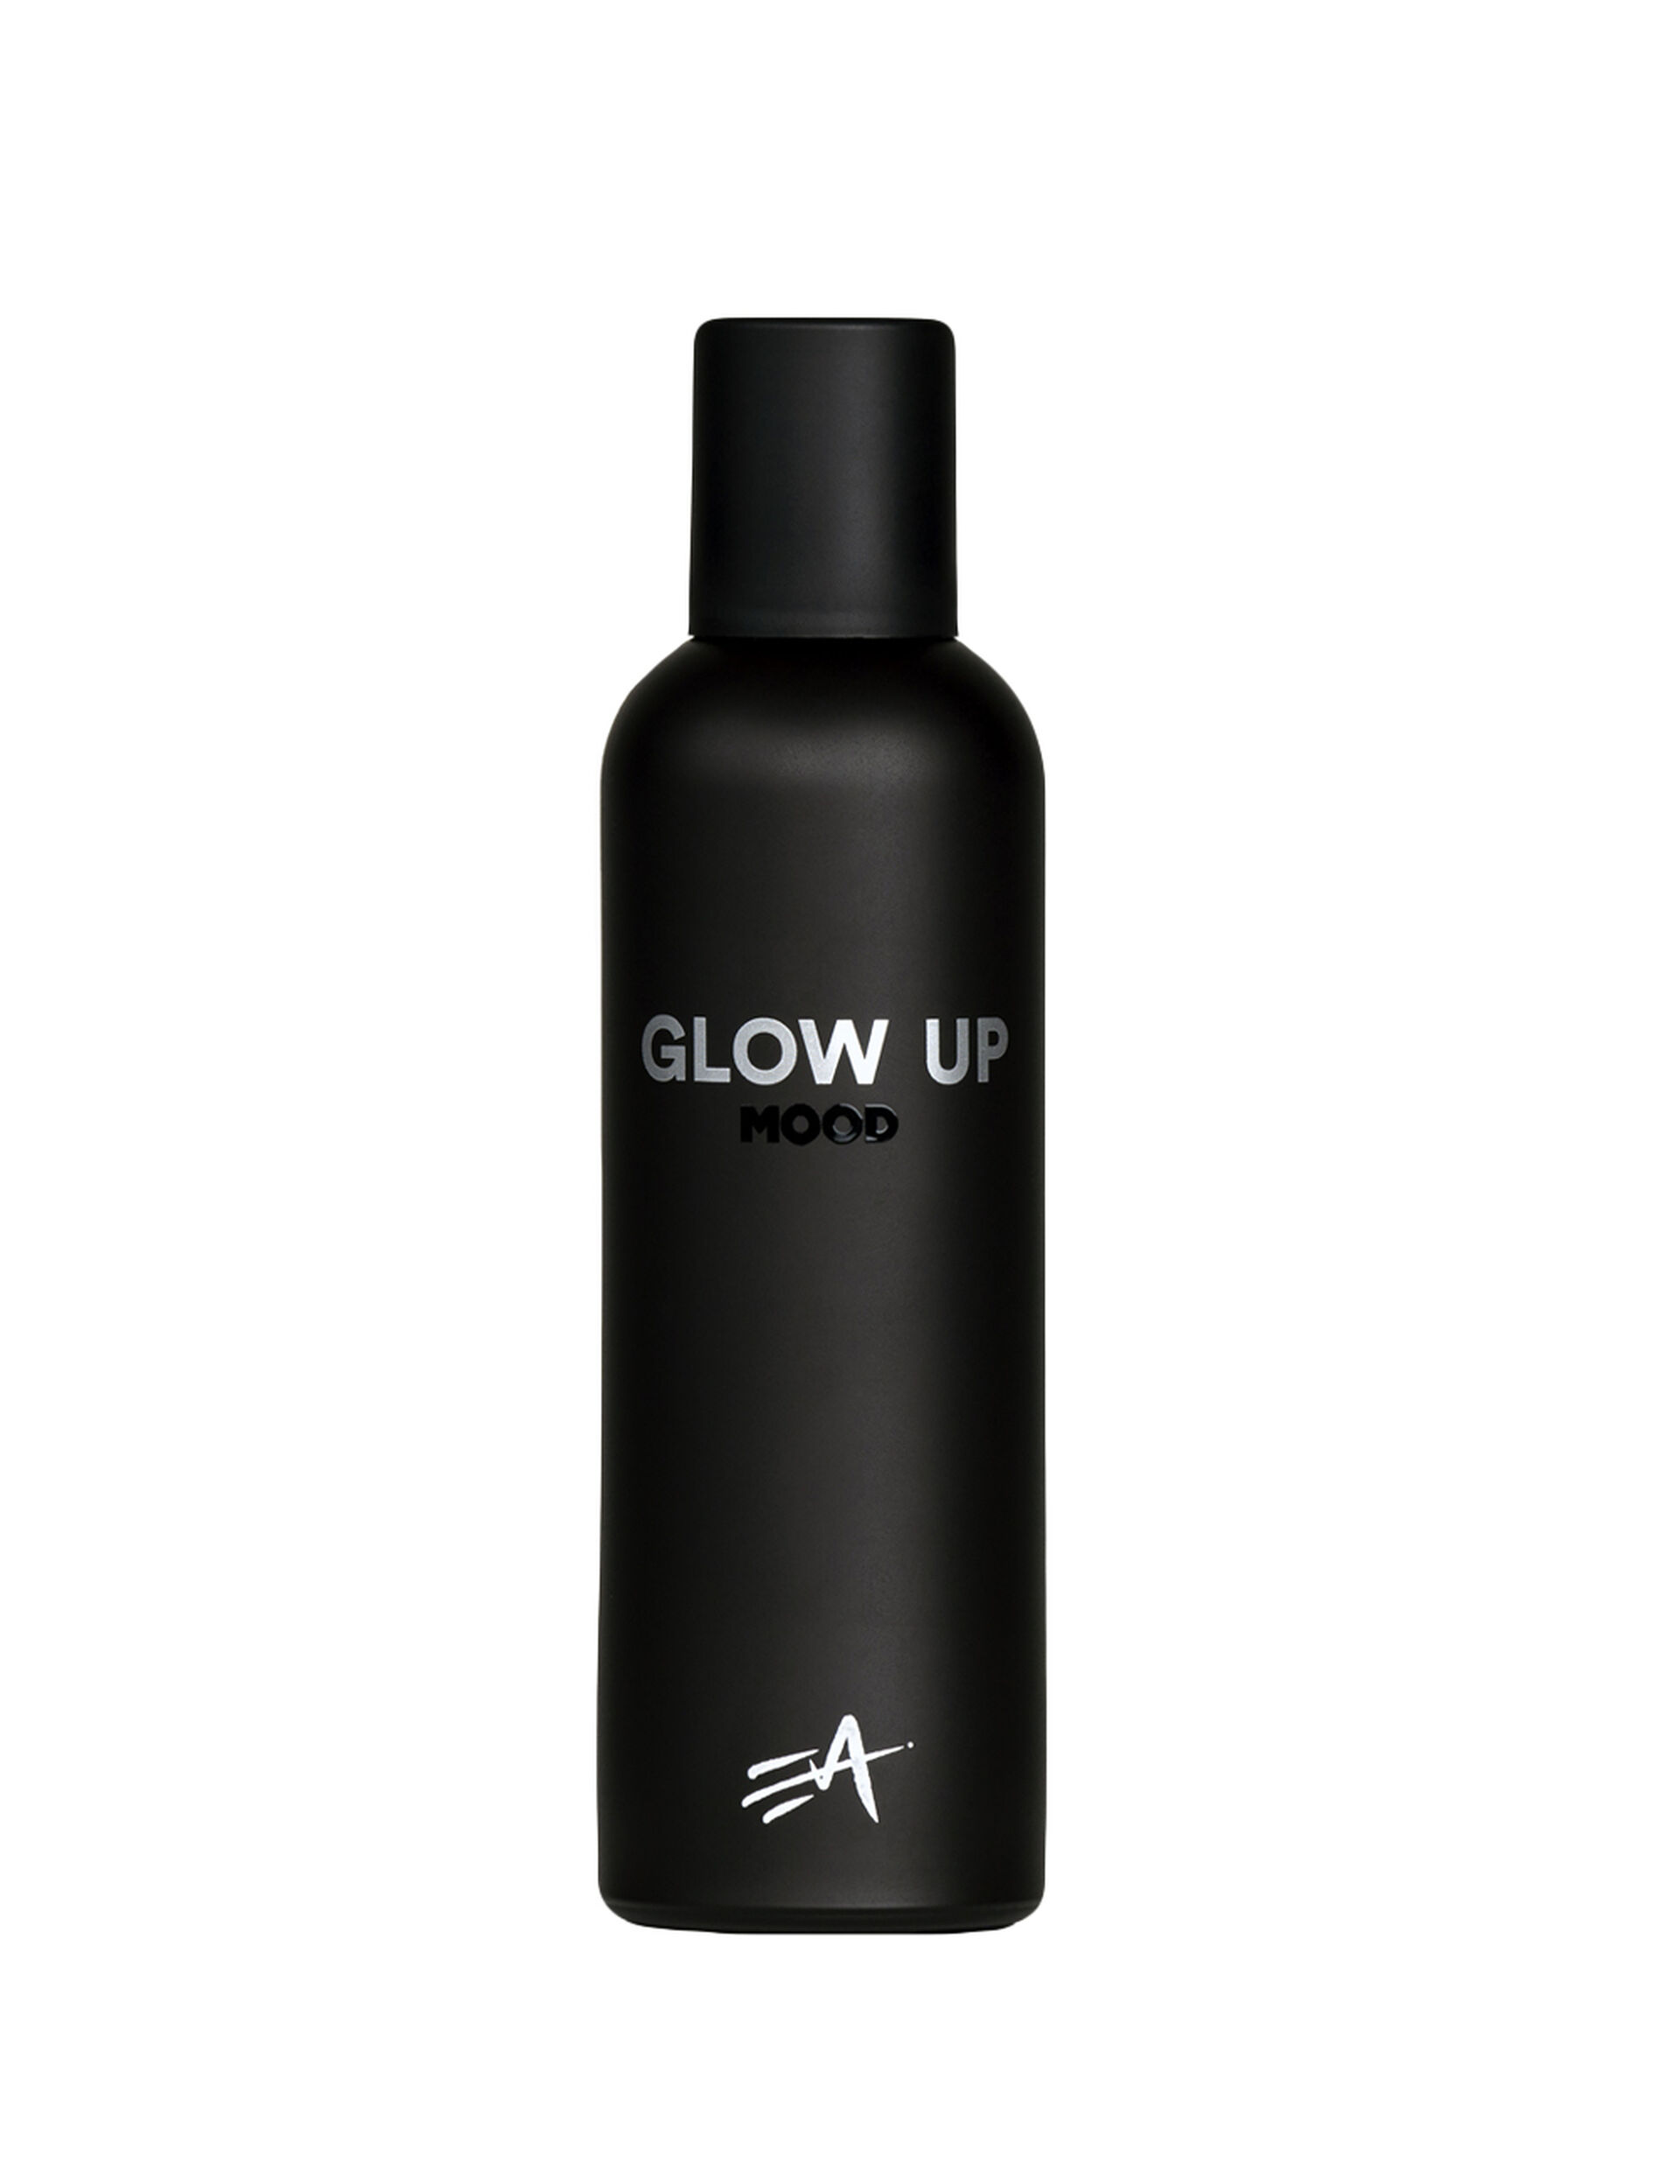 Parfum GLOW UP - It’s time to shine